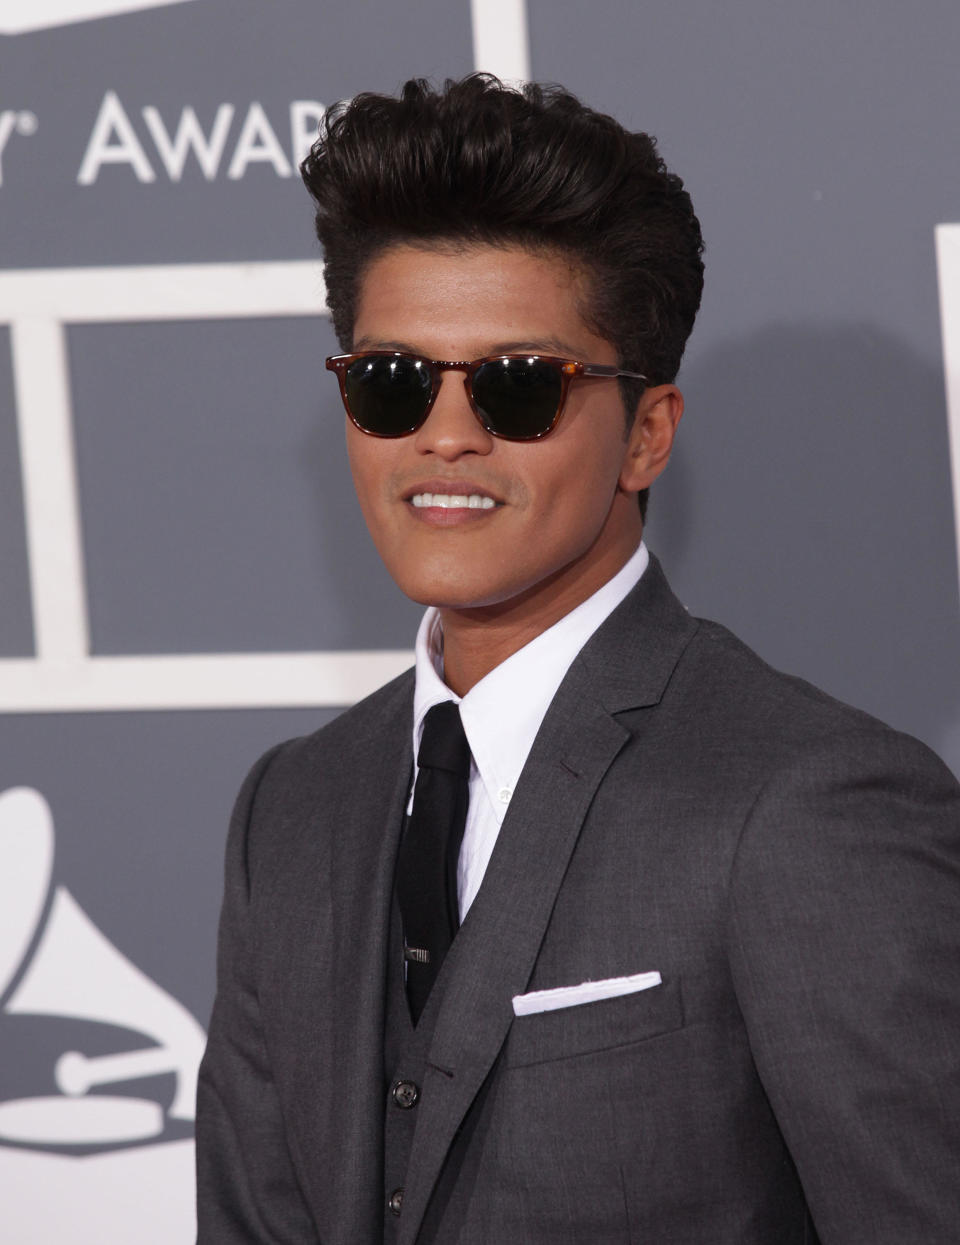 Rumors that the pop star had come out of the closet began after CNN iReport -- a subsection of the media outlet comprising 'citizen journalists' from around the world -- <a href="http://www.towleroad.com/2012/04/bruno-mars-did-not-come-out-of-the-closet.html" target="_hplink">posted a since-removed story</a> that stated, "The famous pop-star Bruno Mars admits his homosexuality," which caused the Mars' name to trend on Twitter.  Nonetheless, Mars' rep called the report "completely fabricated" and "false," <a href="http://www.gossipcop.com/bruno-mars-gay-out-of-closet-homosexual-april-2012/" target="_hplink">according to Gossip Cop</a>.